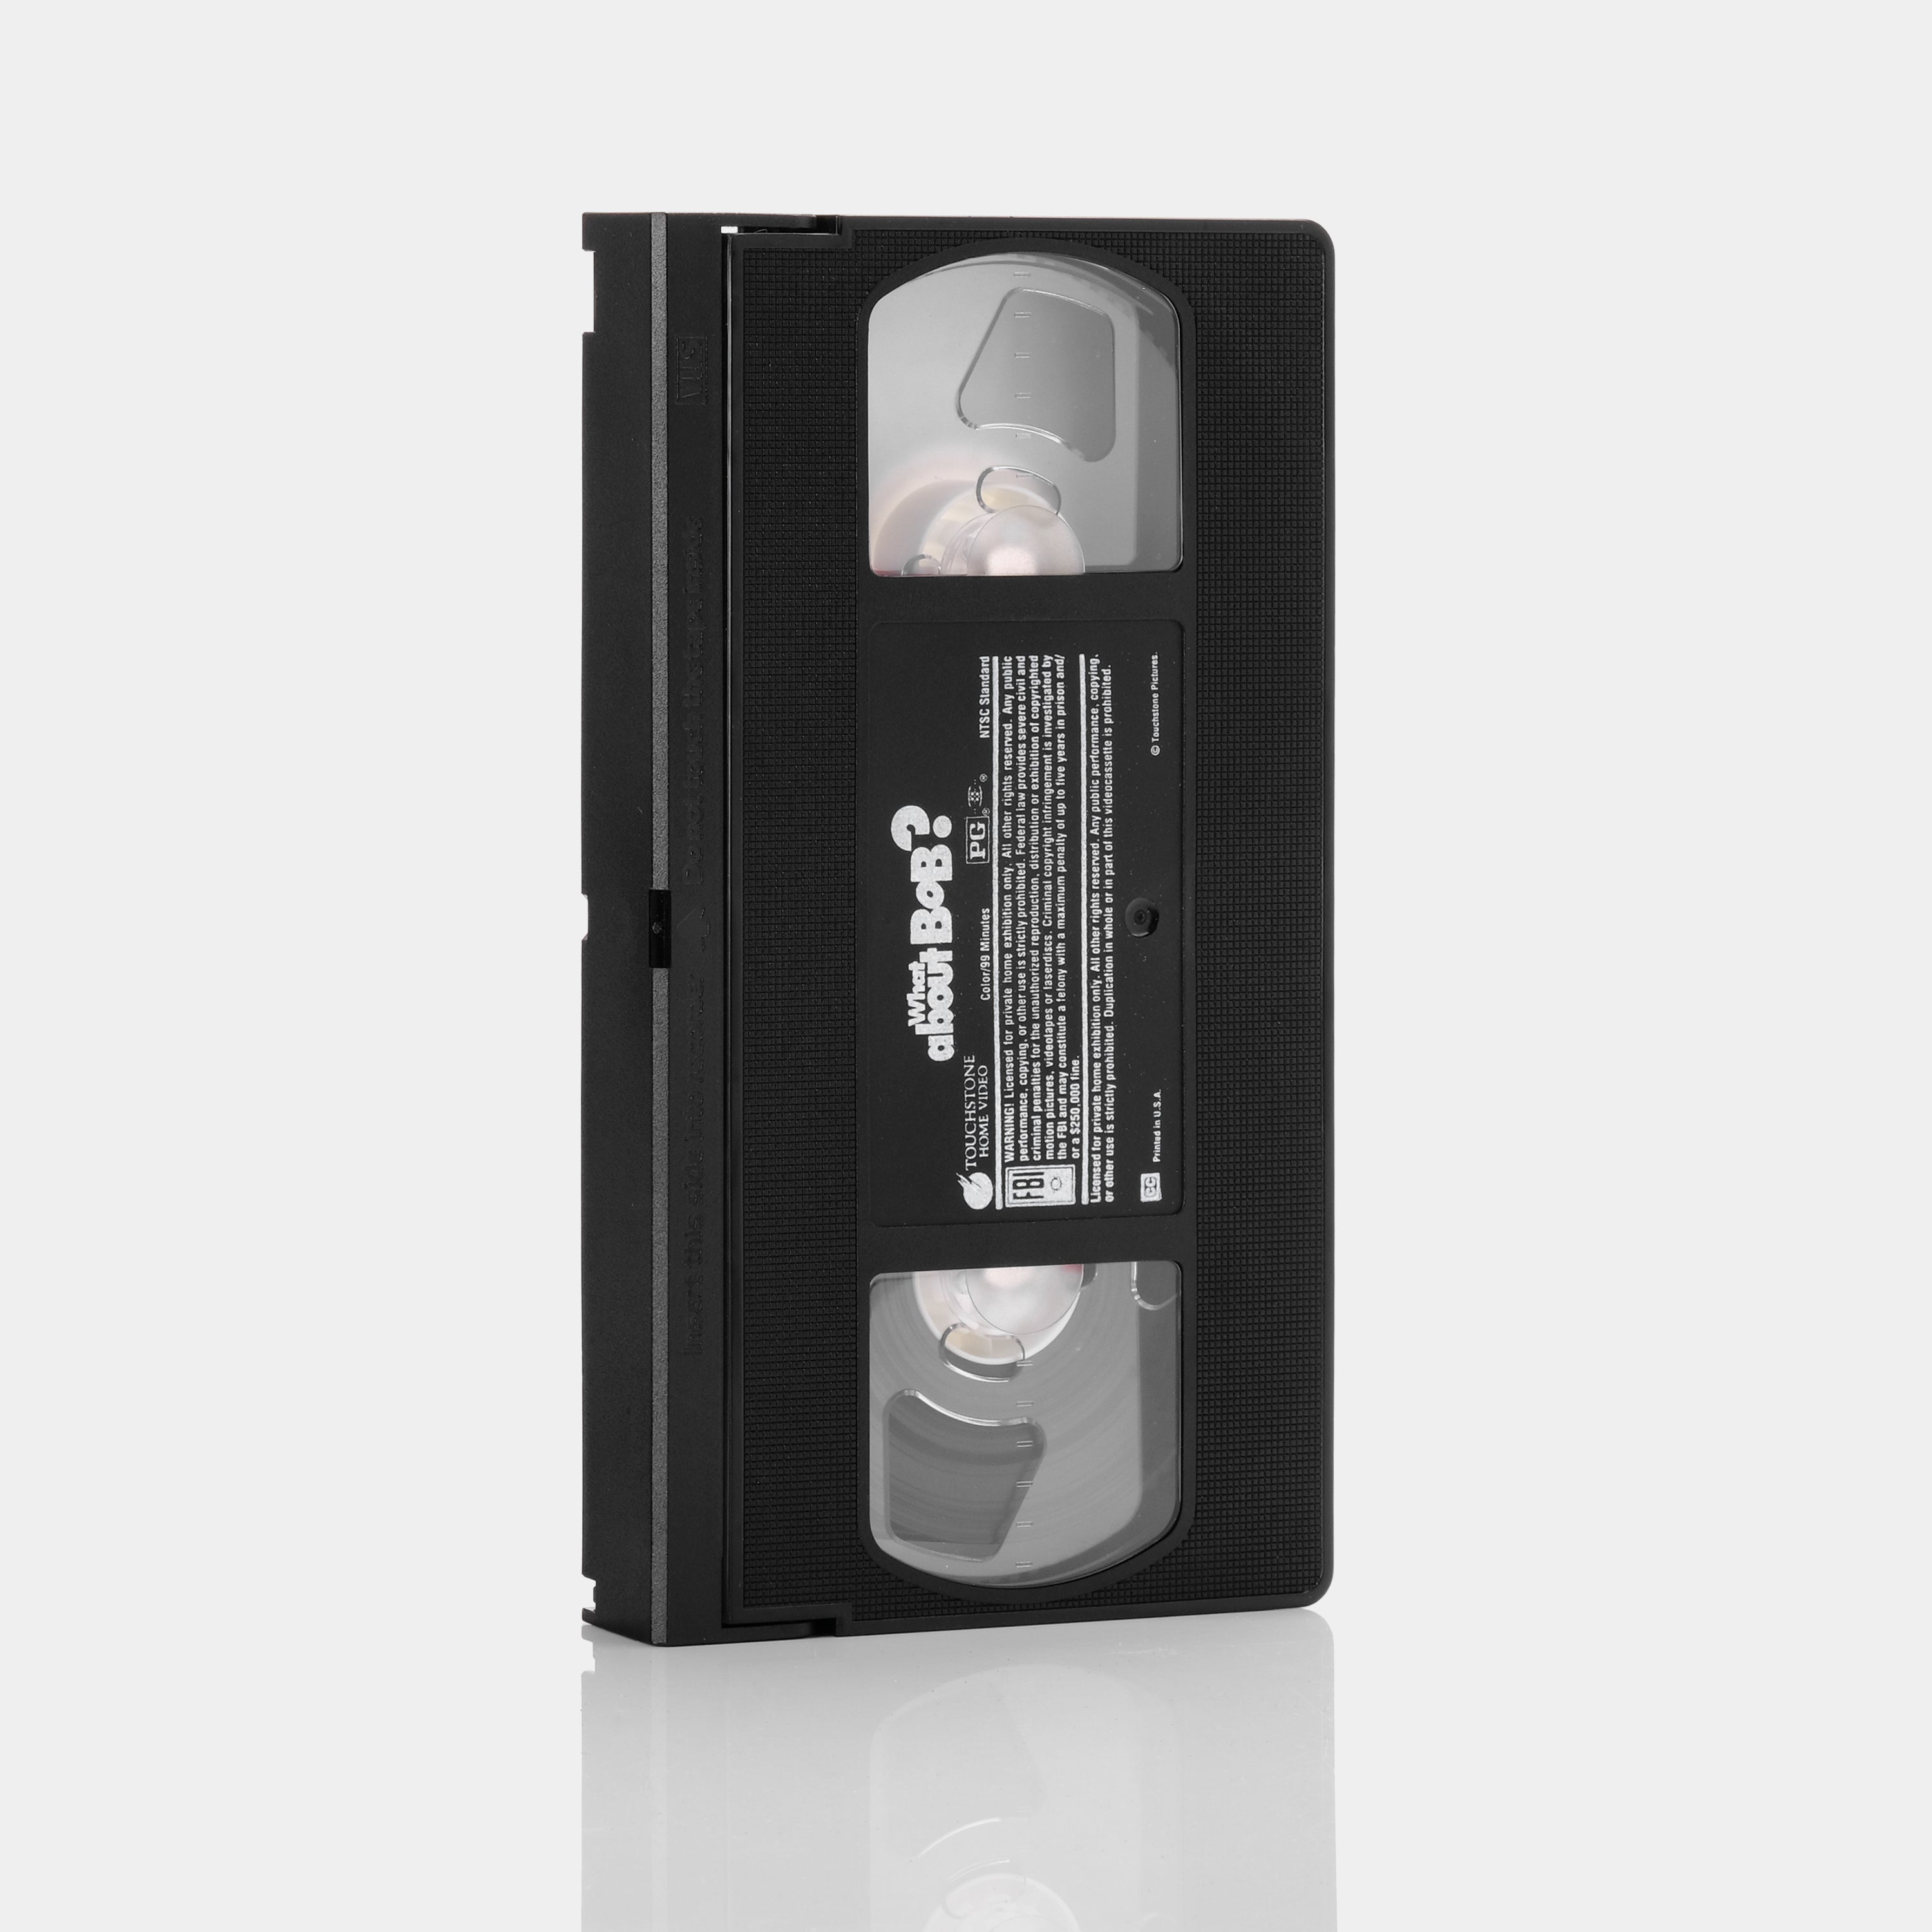 What About Bob? VHS Tape